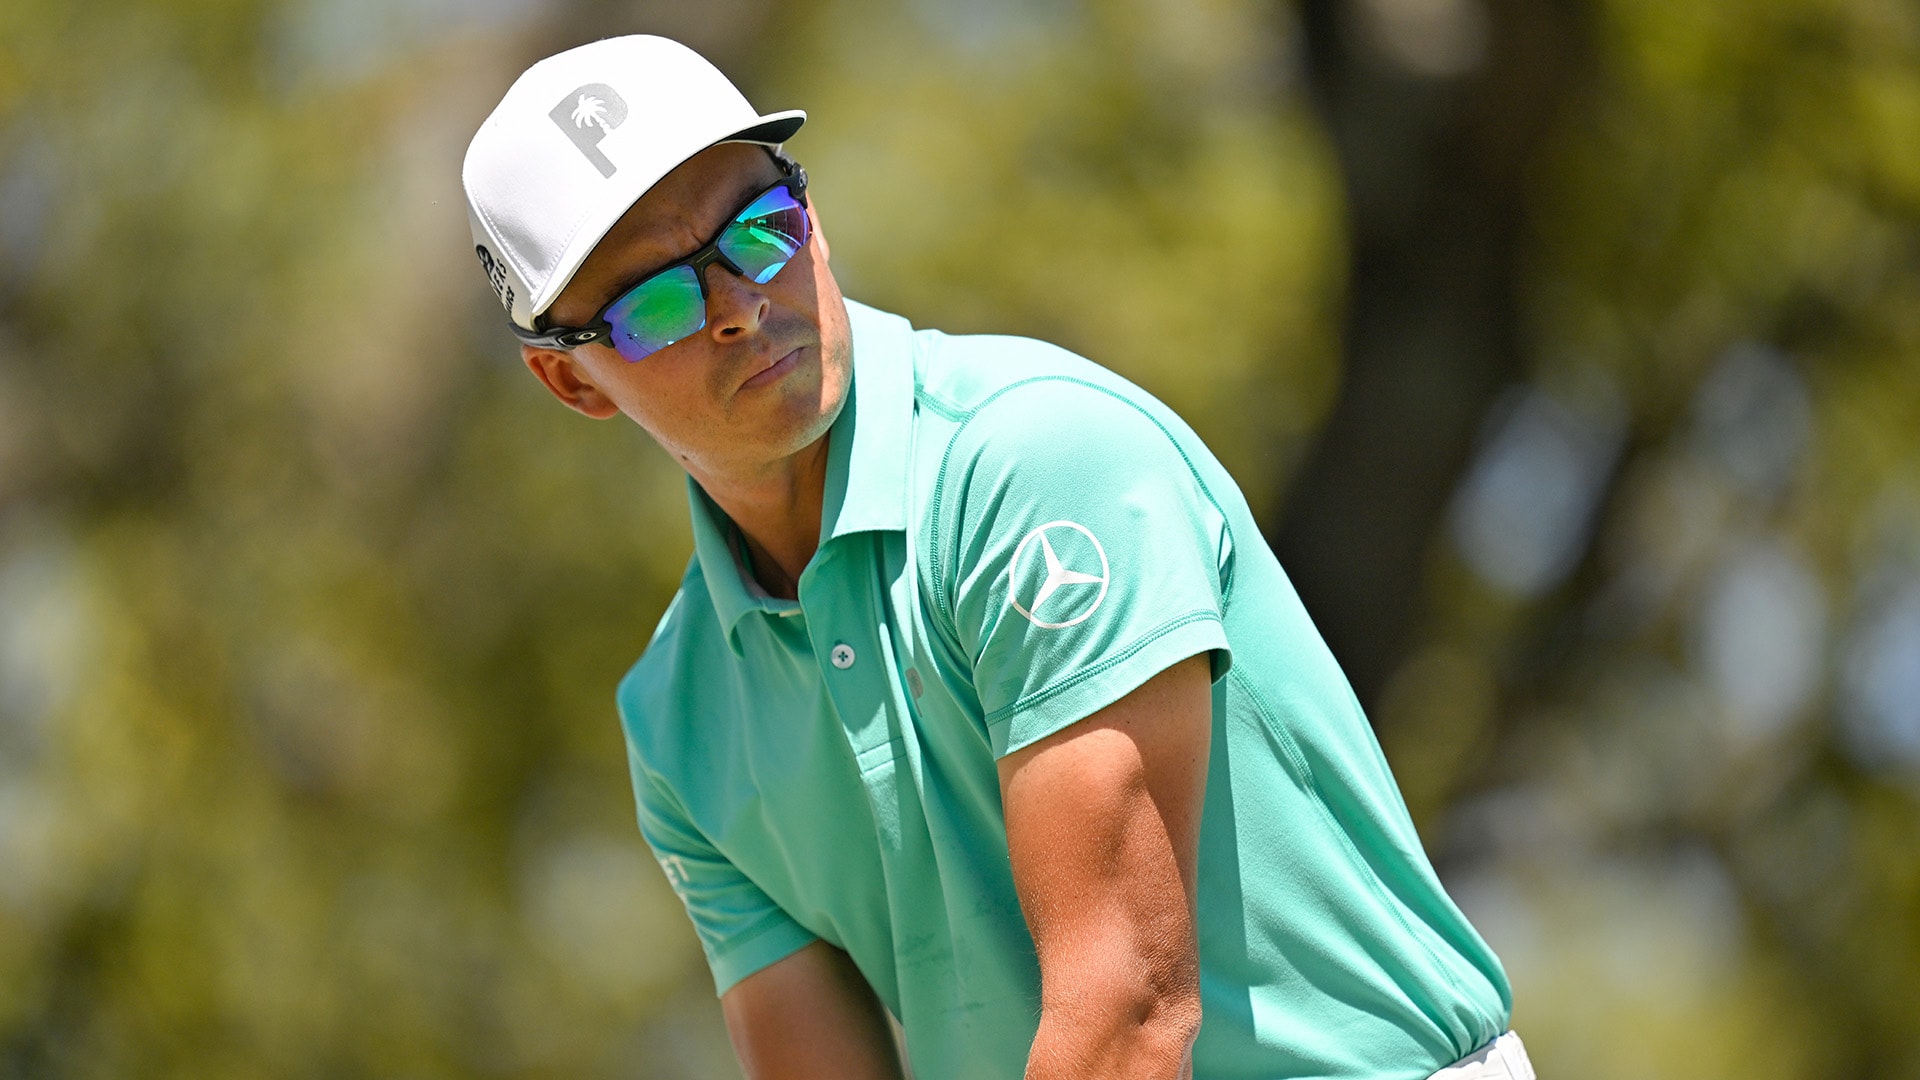 Rickie Fowler back in world’s top 50, among latest PGA Championship qualifiers